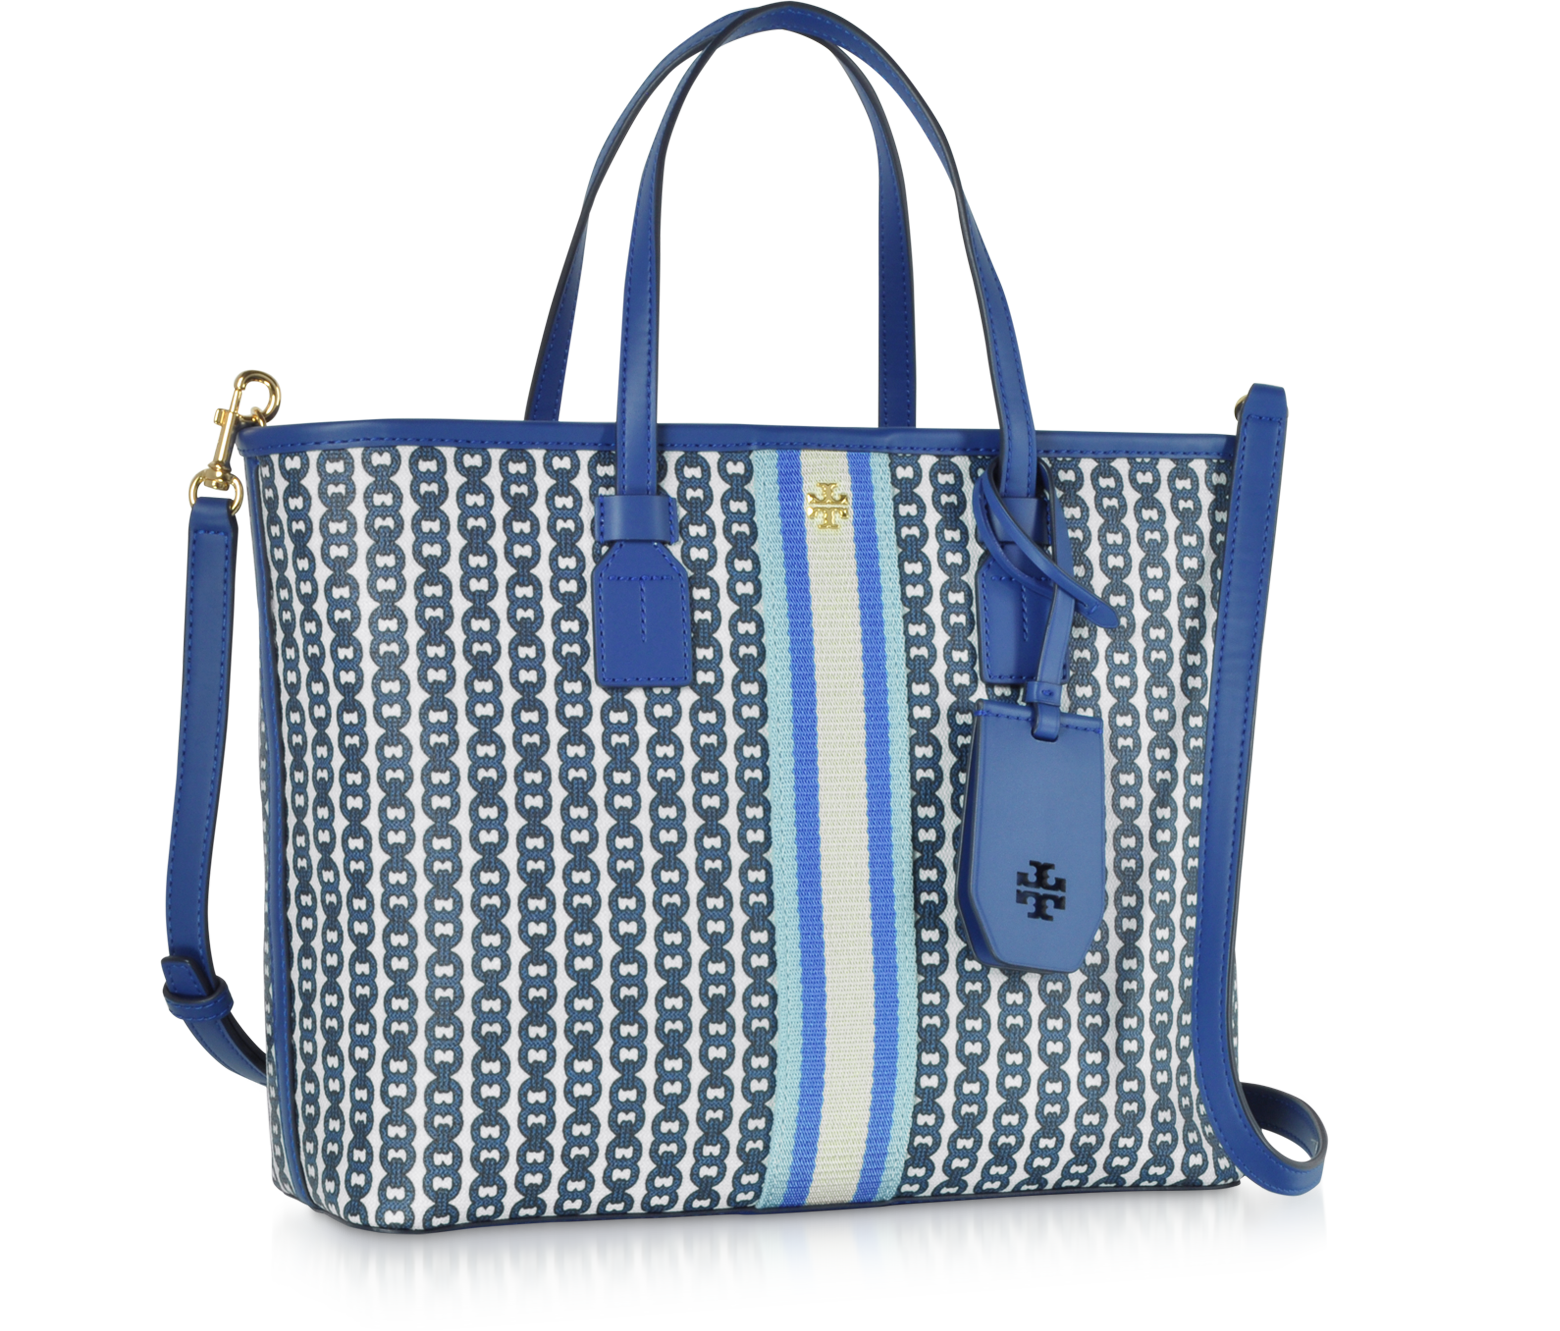 7831 TORY BURCH Gemini Link Canvas Small Tote BLUE YONDER